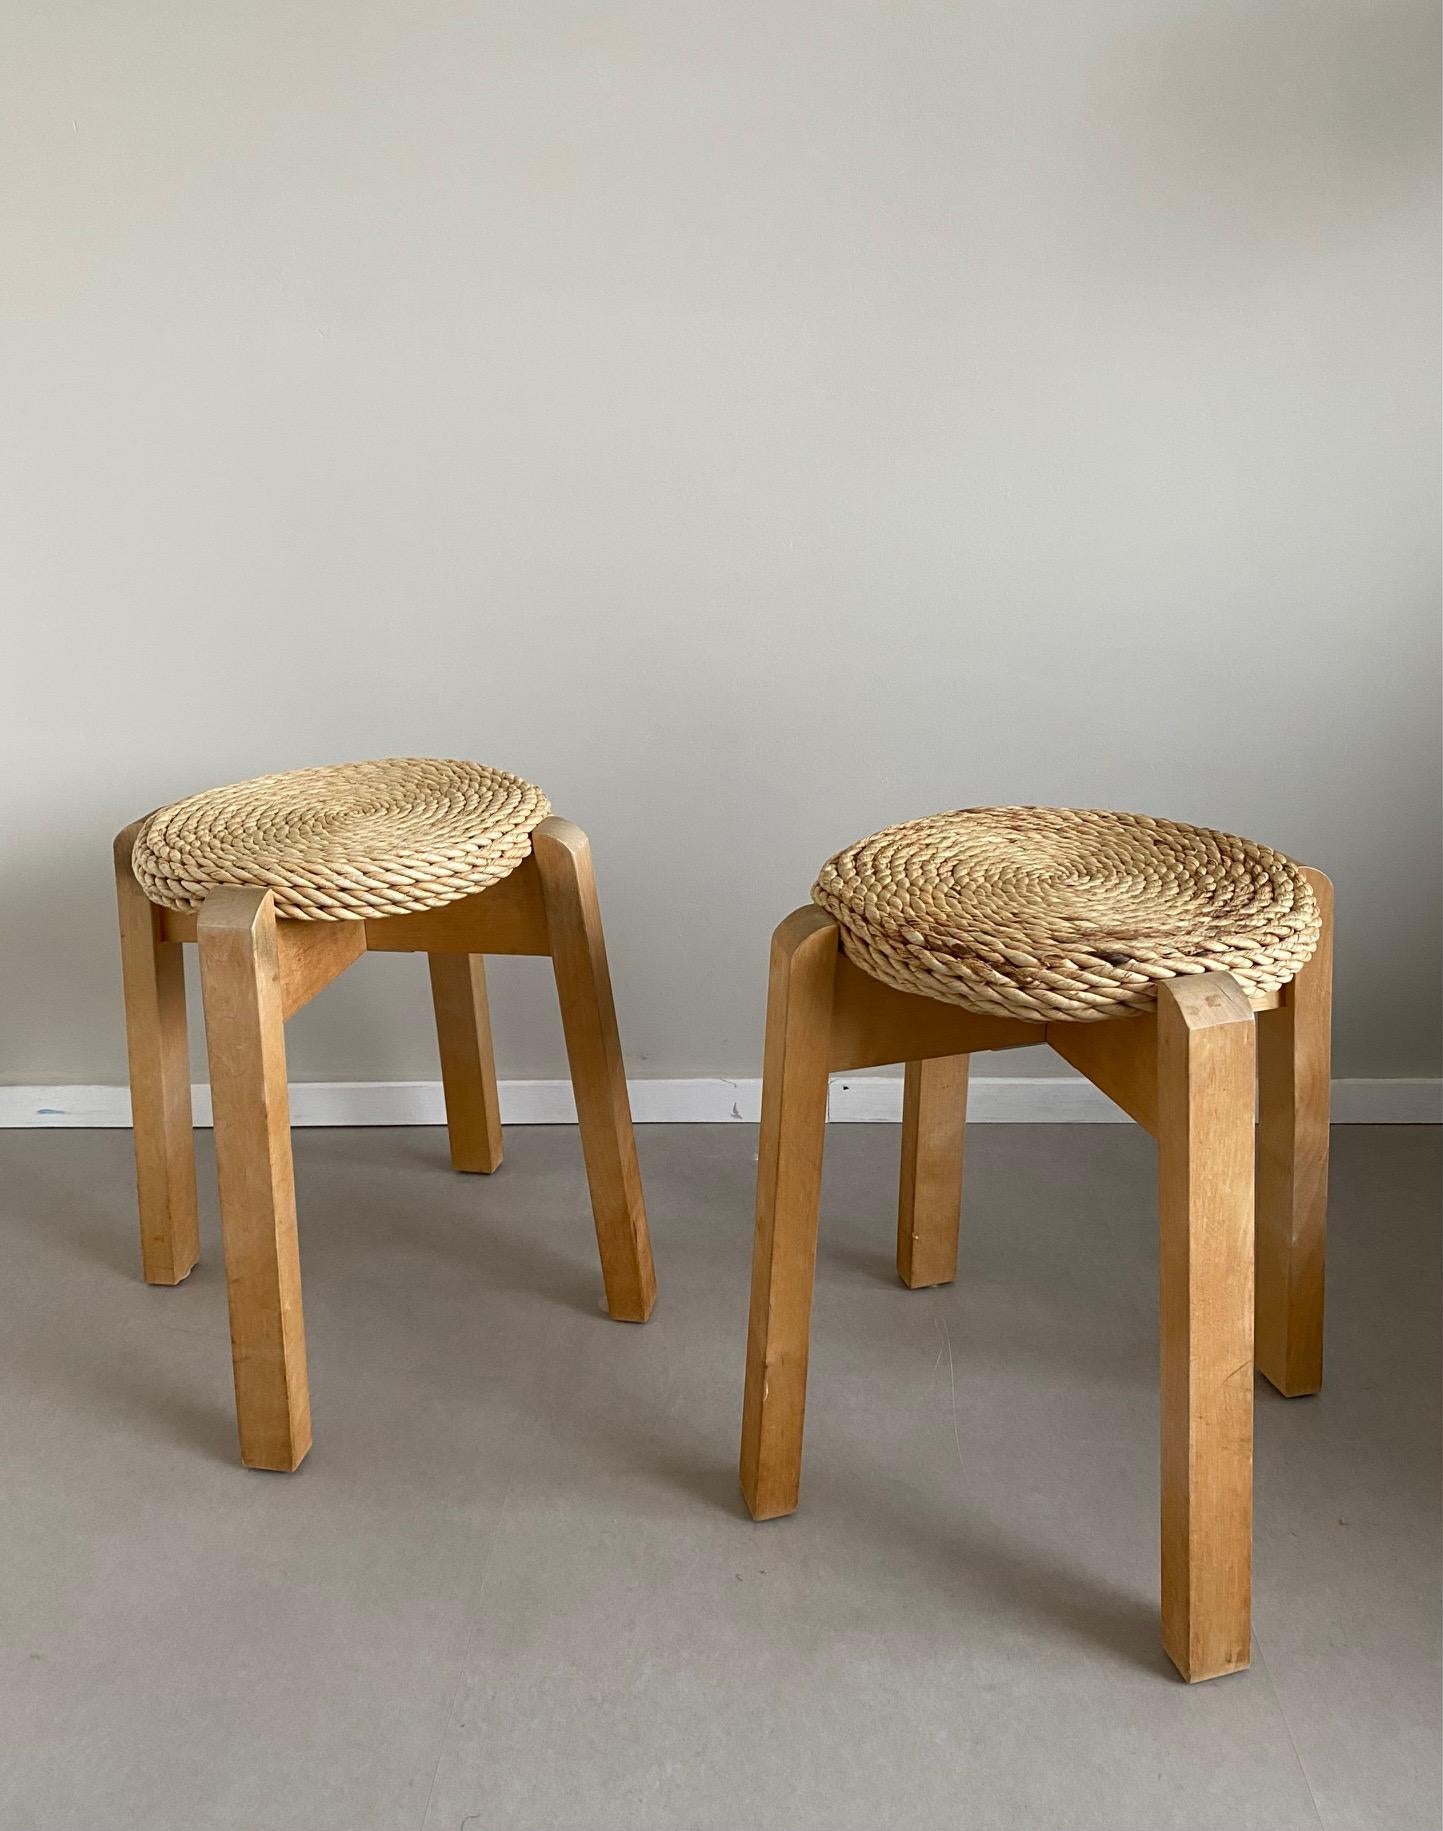 Set of Two Wonderful Woven Stools in Style of Adoux And Minet, Manufactured ca. the 1970s. Stools Feature a Woven Seating with An Organic Rope. Their Wooden Base show some wear as Stains and Scratches As To Be Seen On The Images. Scandinavian Look.